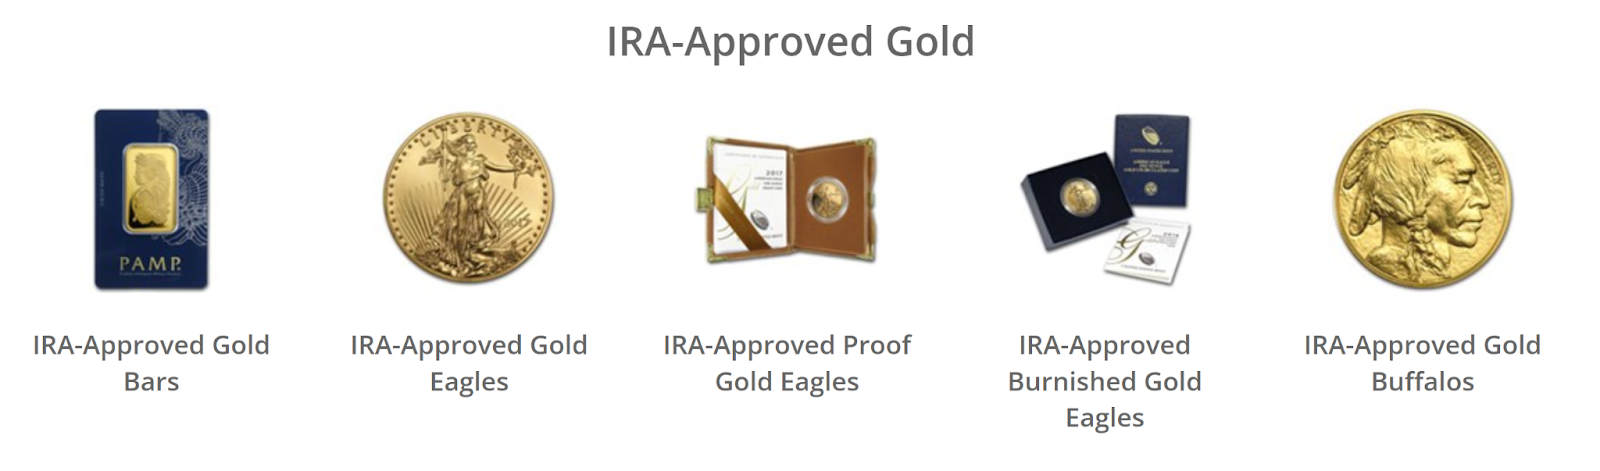 IRA approved Gold Products by American Precious Metals Exchange